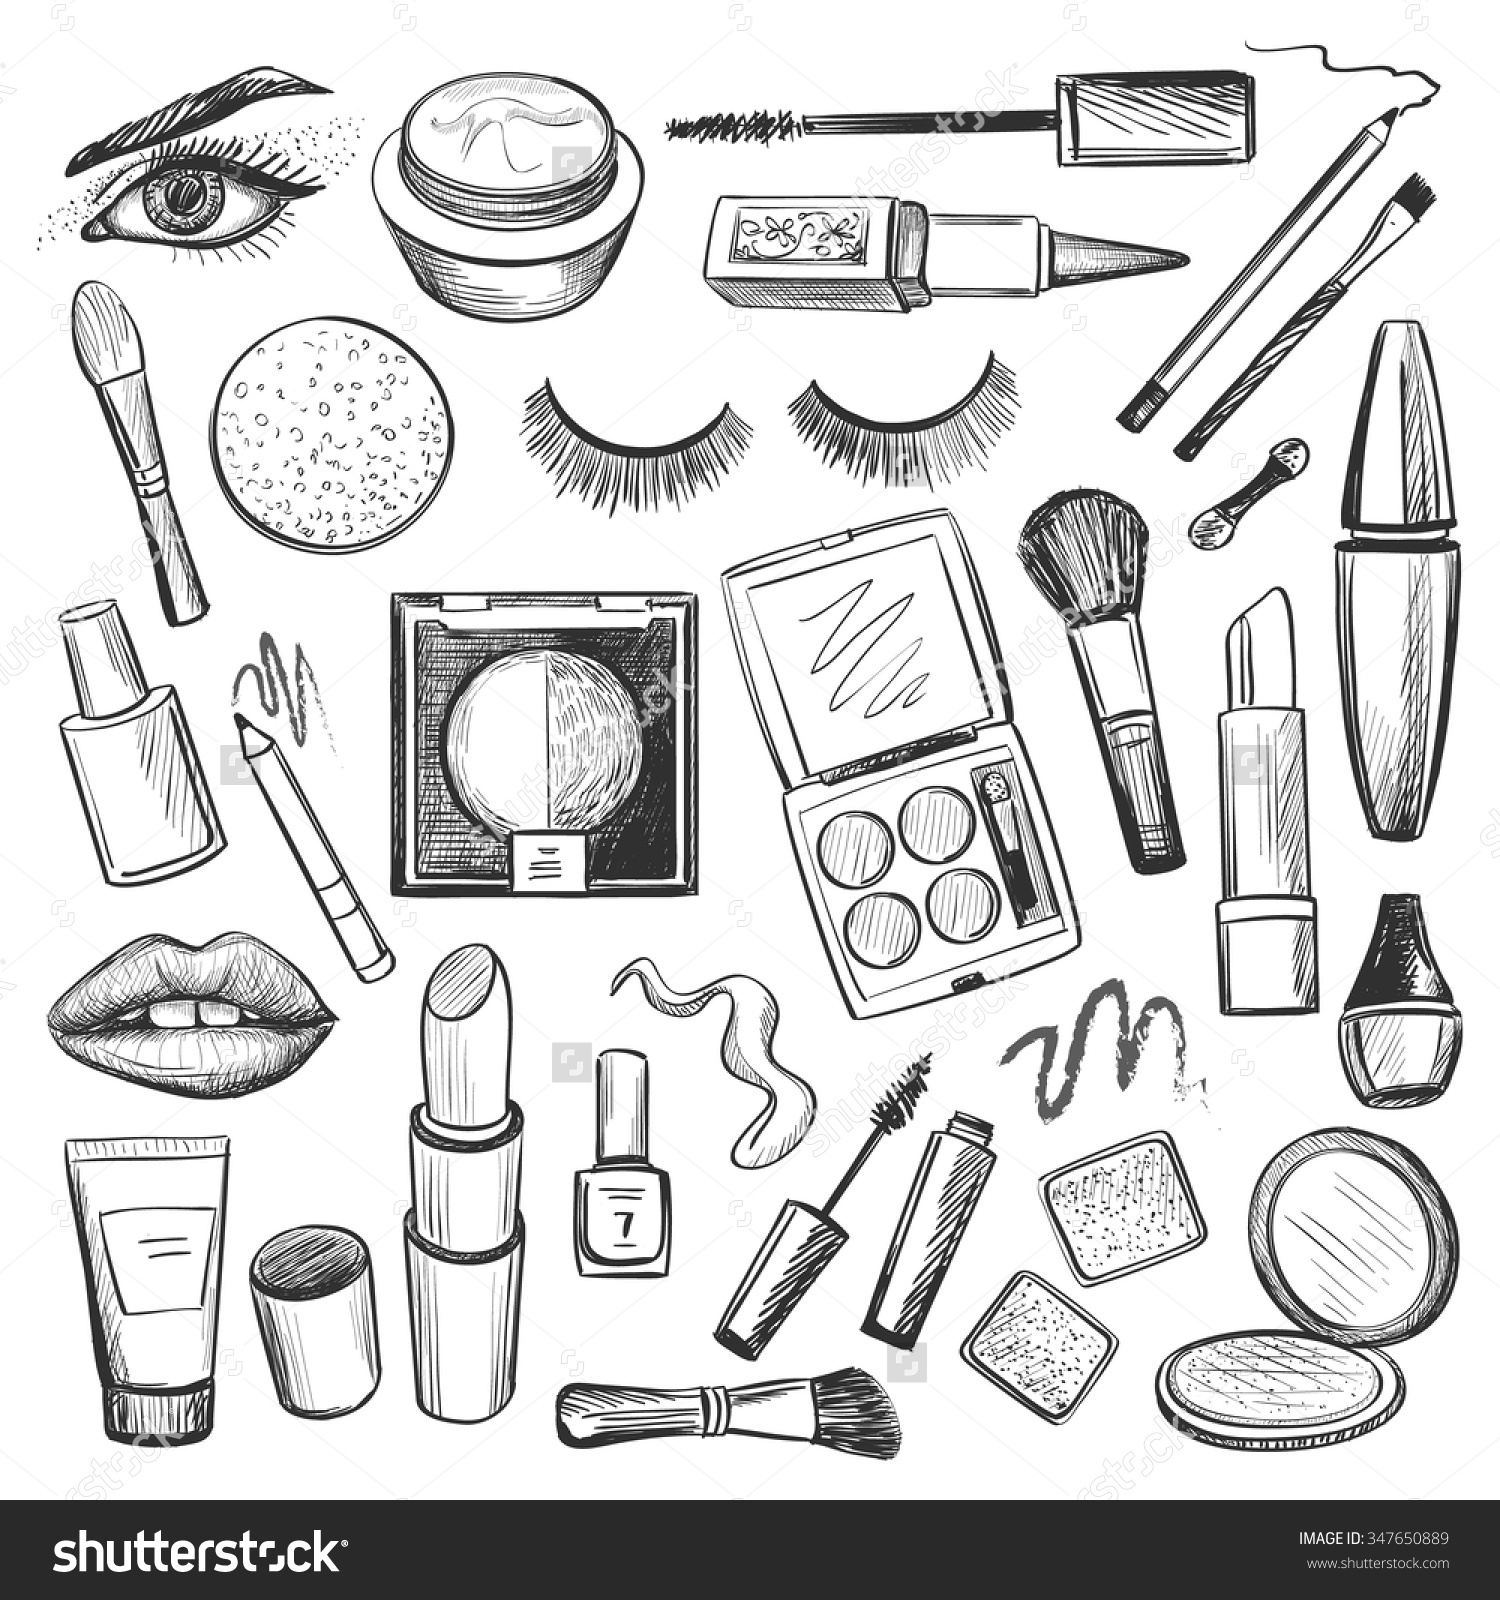 Eye makeup clipart black and white 